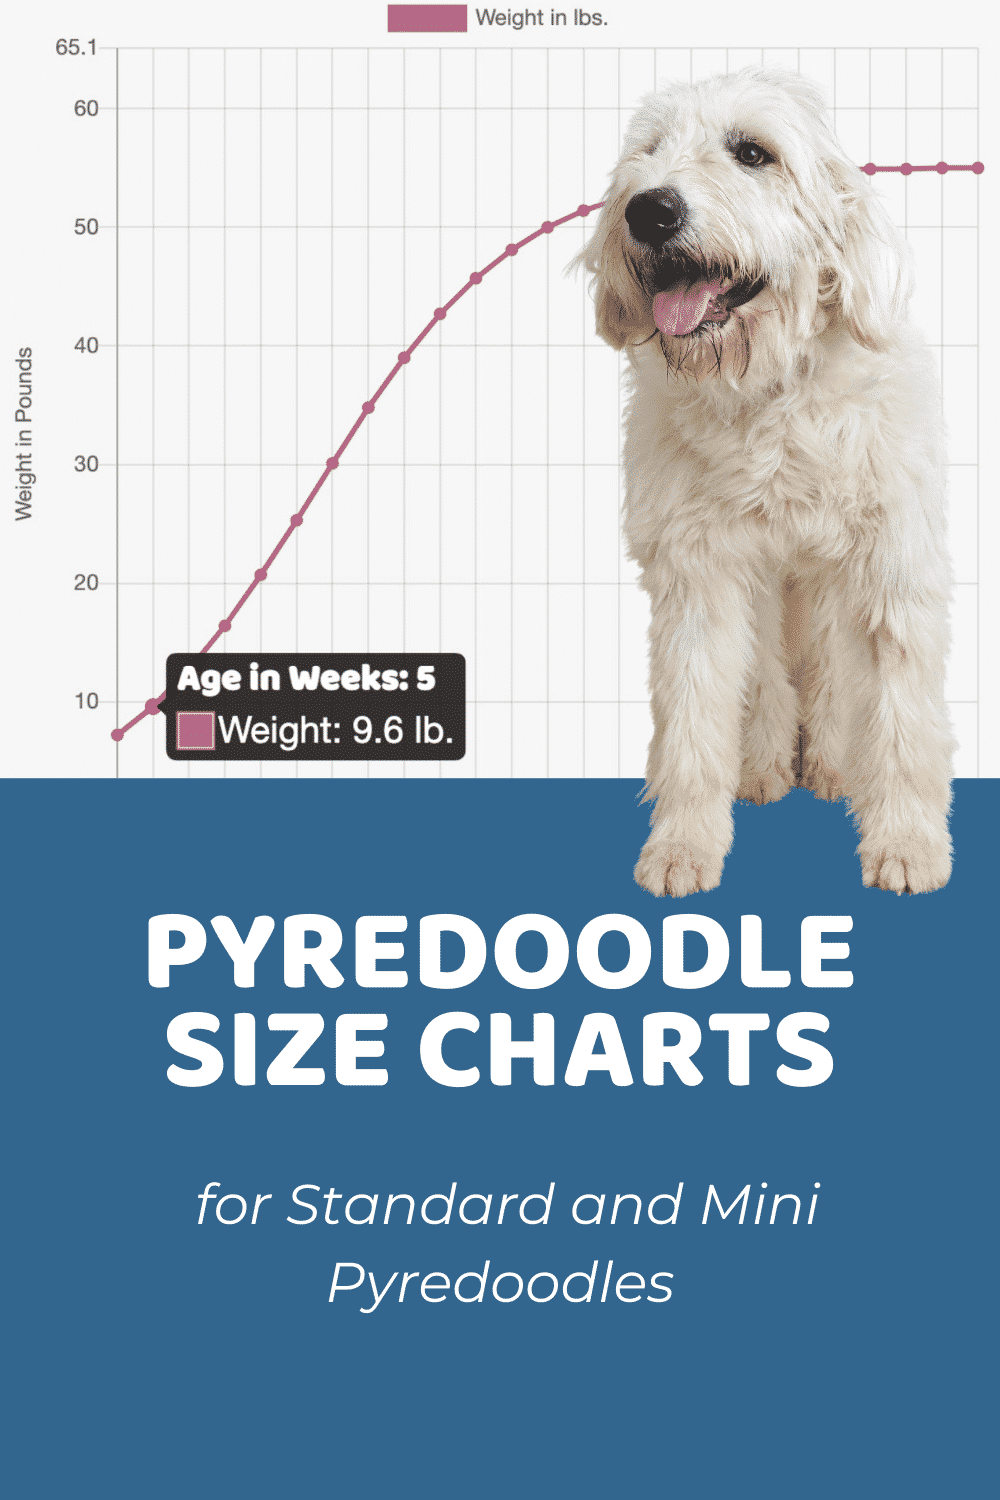 Pyredoodle Size Chart for Standard and Mini Pyredoodles